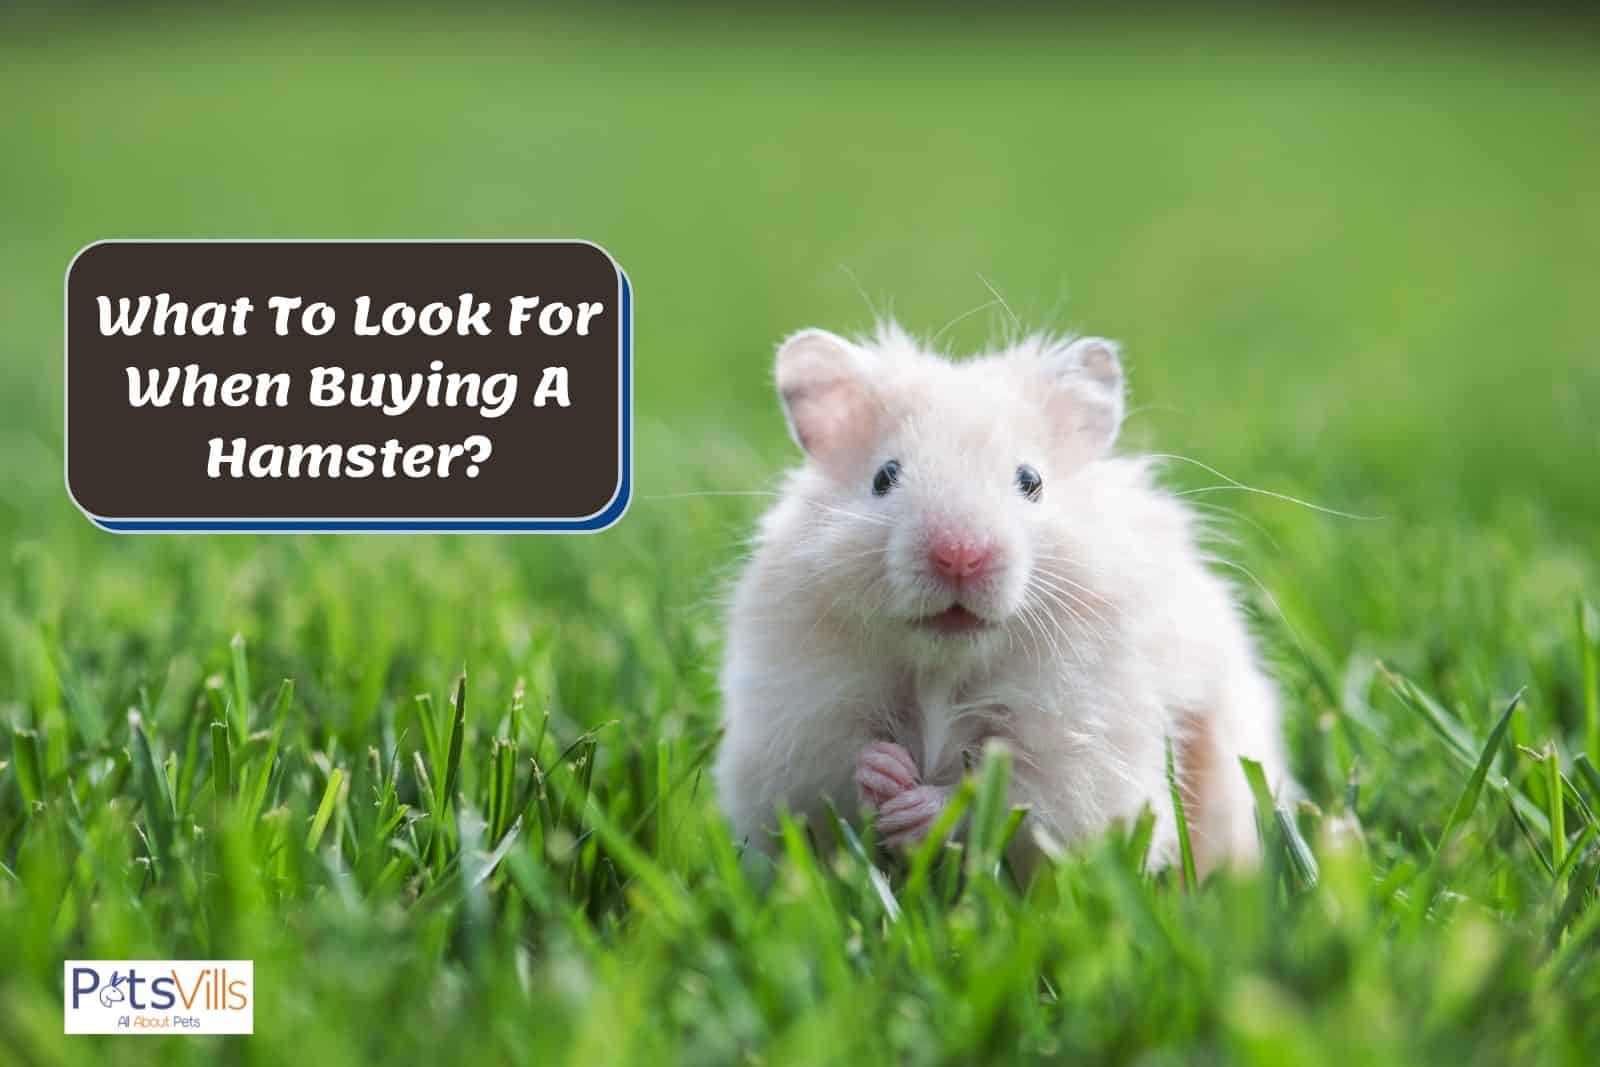 a cute hamster, thins to consider before buying a hamster